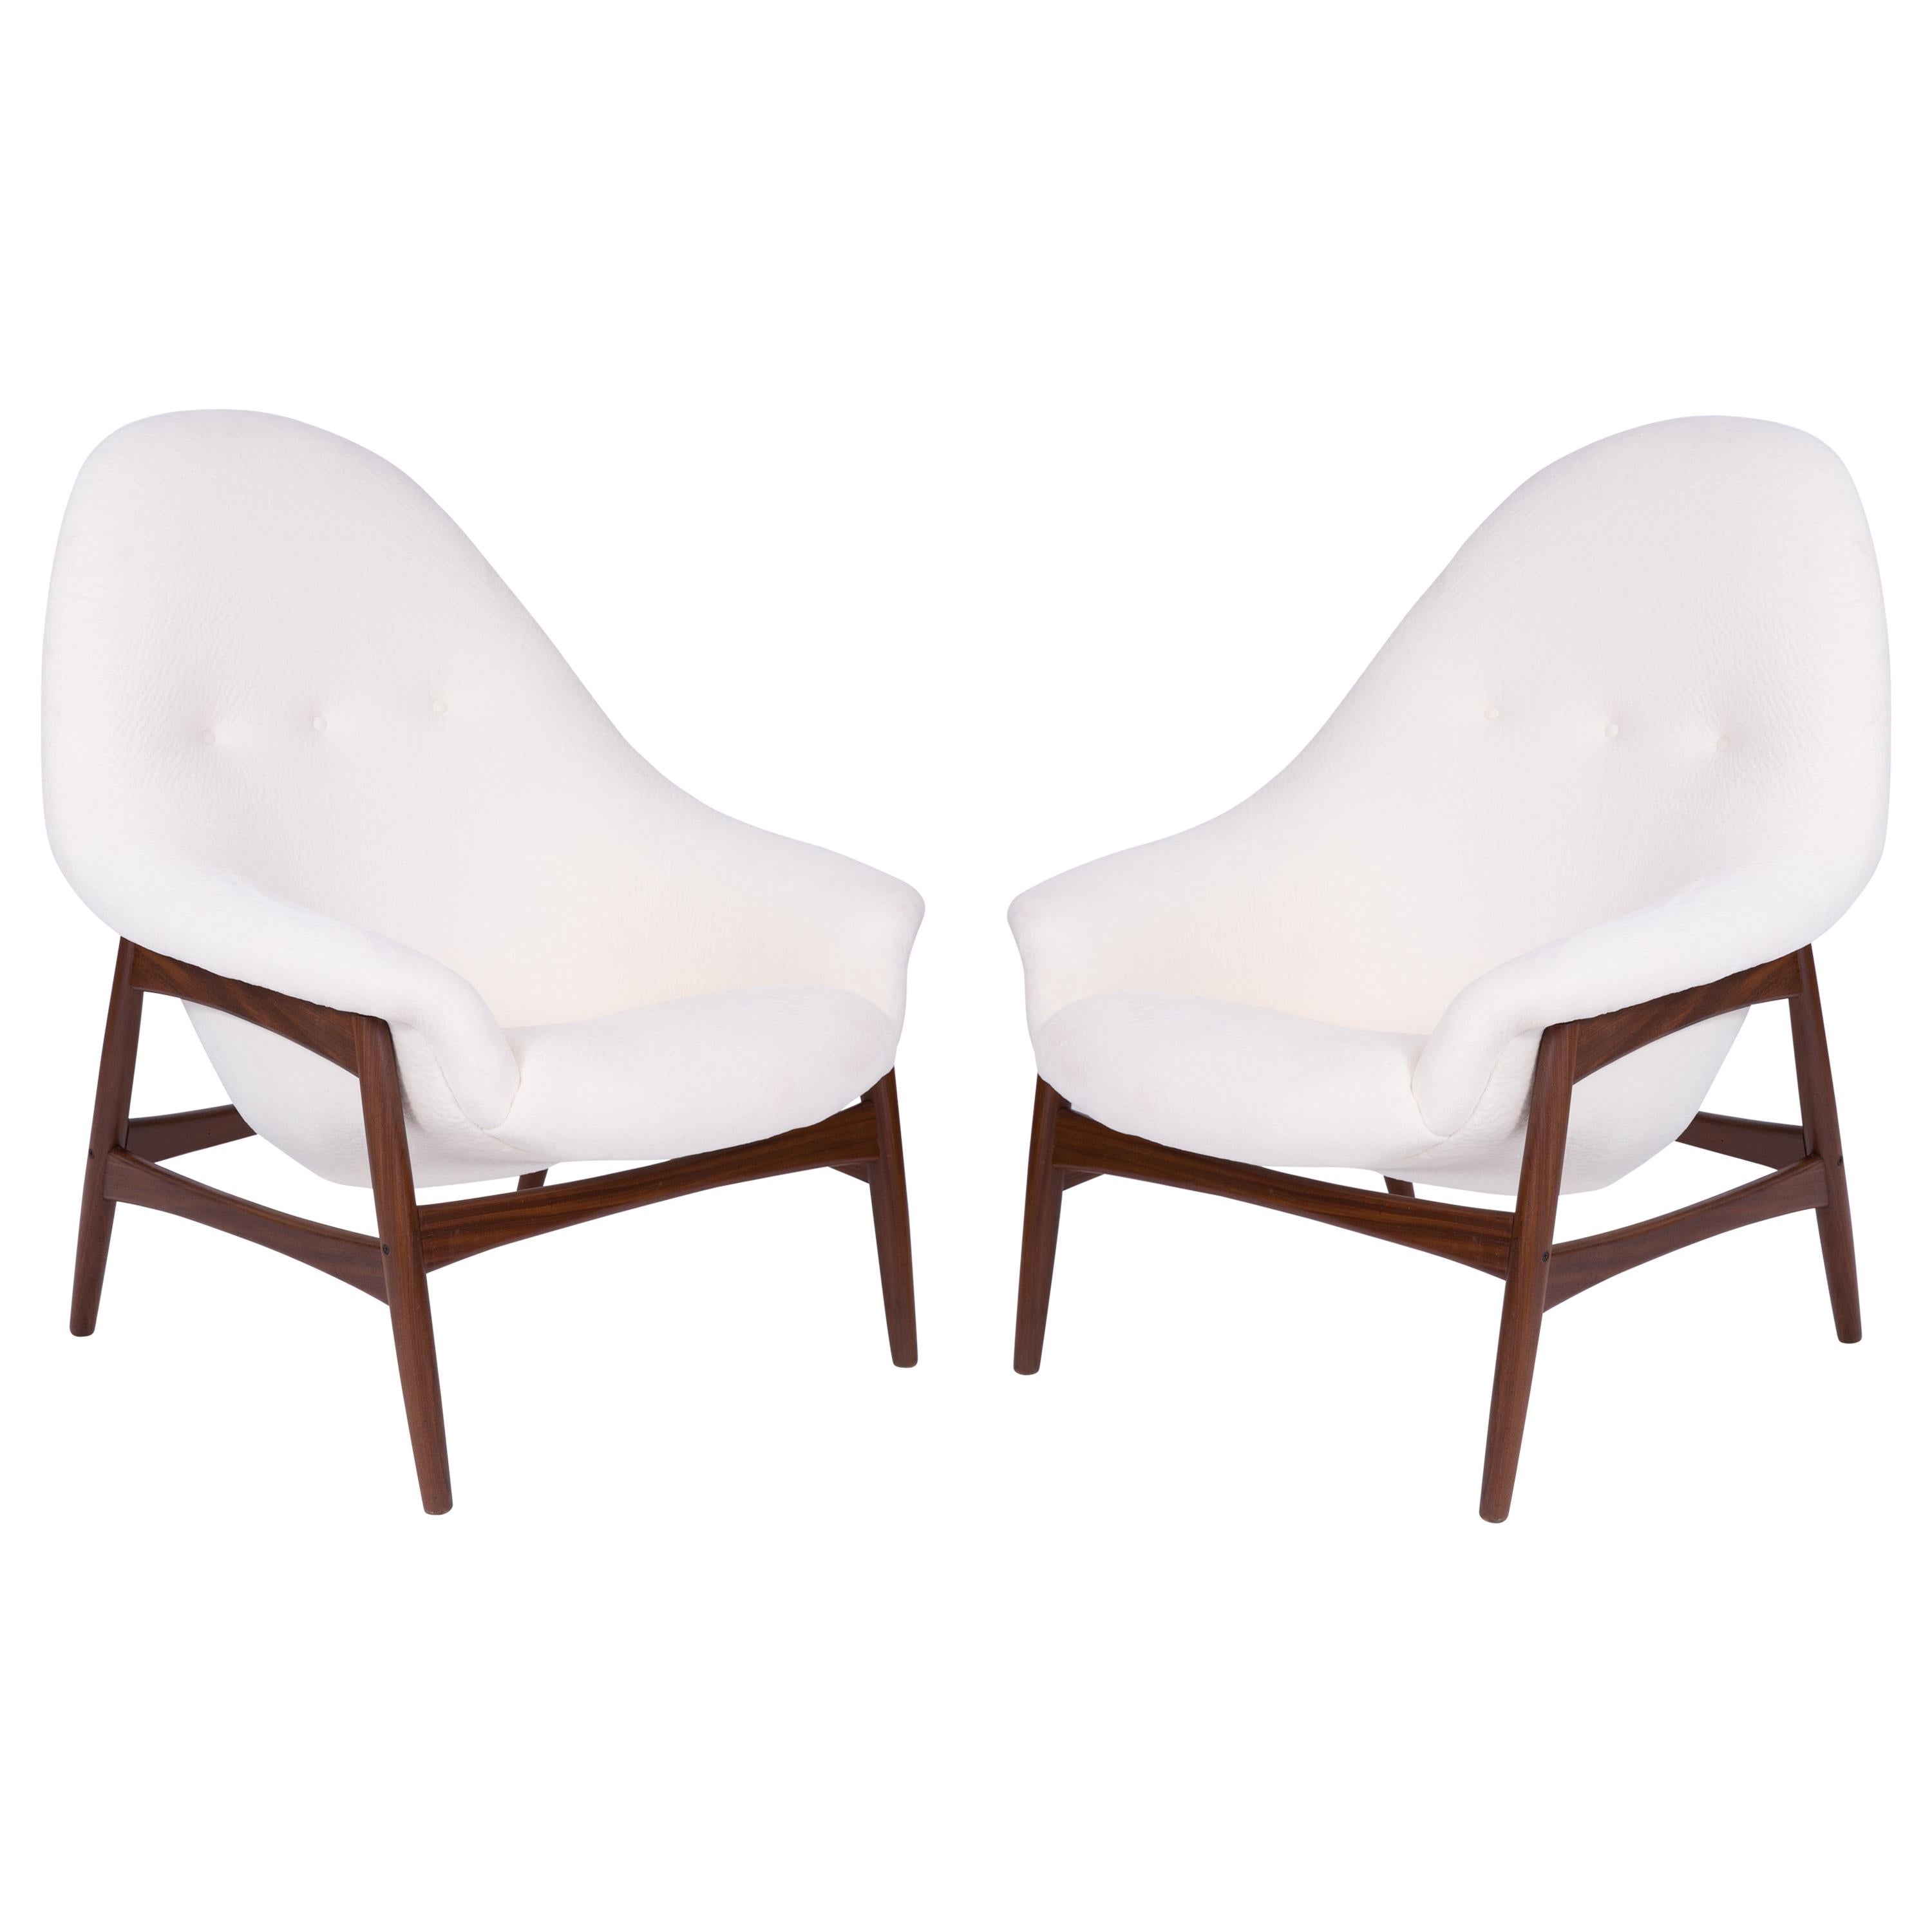 Hans Olsen for Bramin Sculptural Walnut Lounge Chairs with Off-White Upholstery